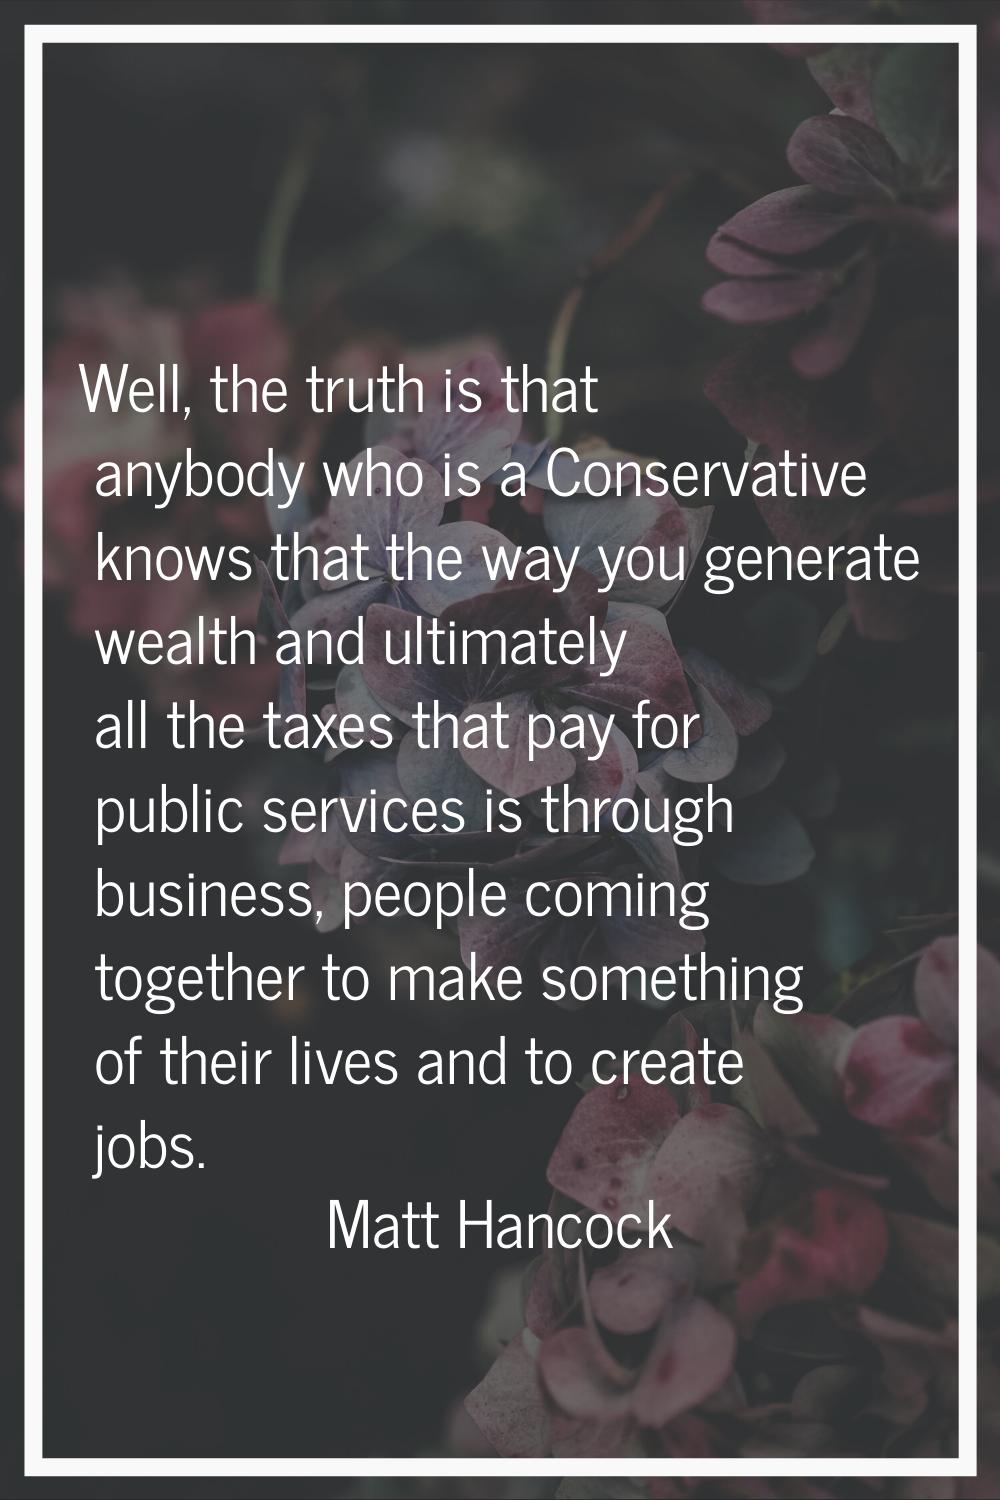 Well, the truth is that anybody who is a Conservative knows that the way you generate wealth and ul